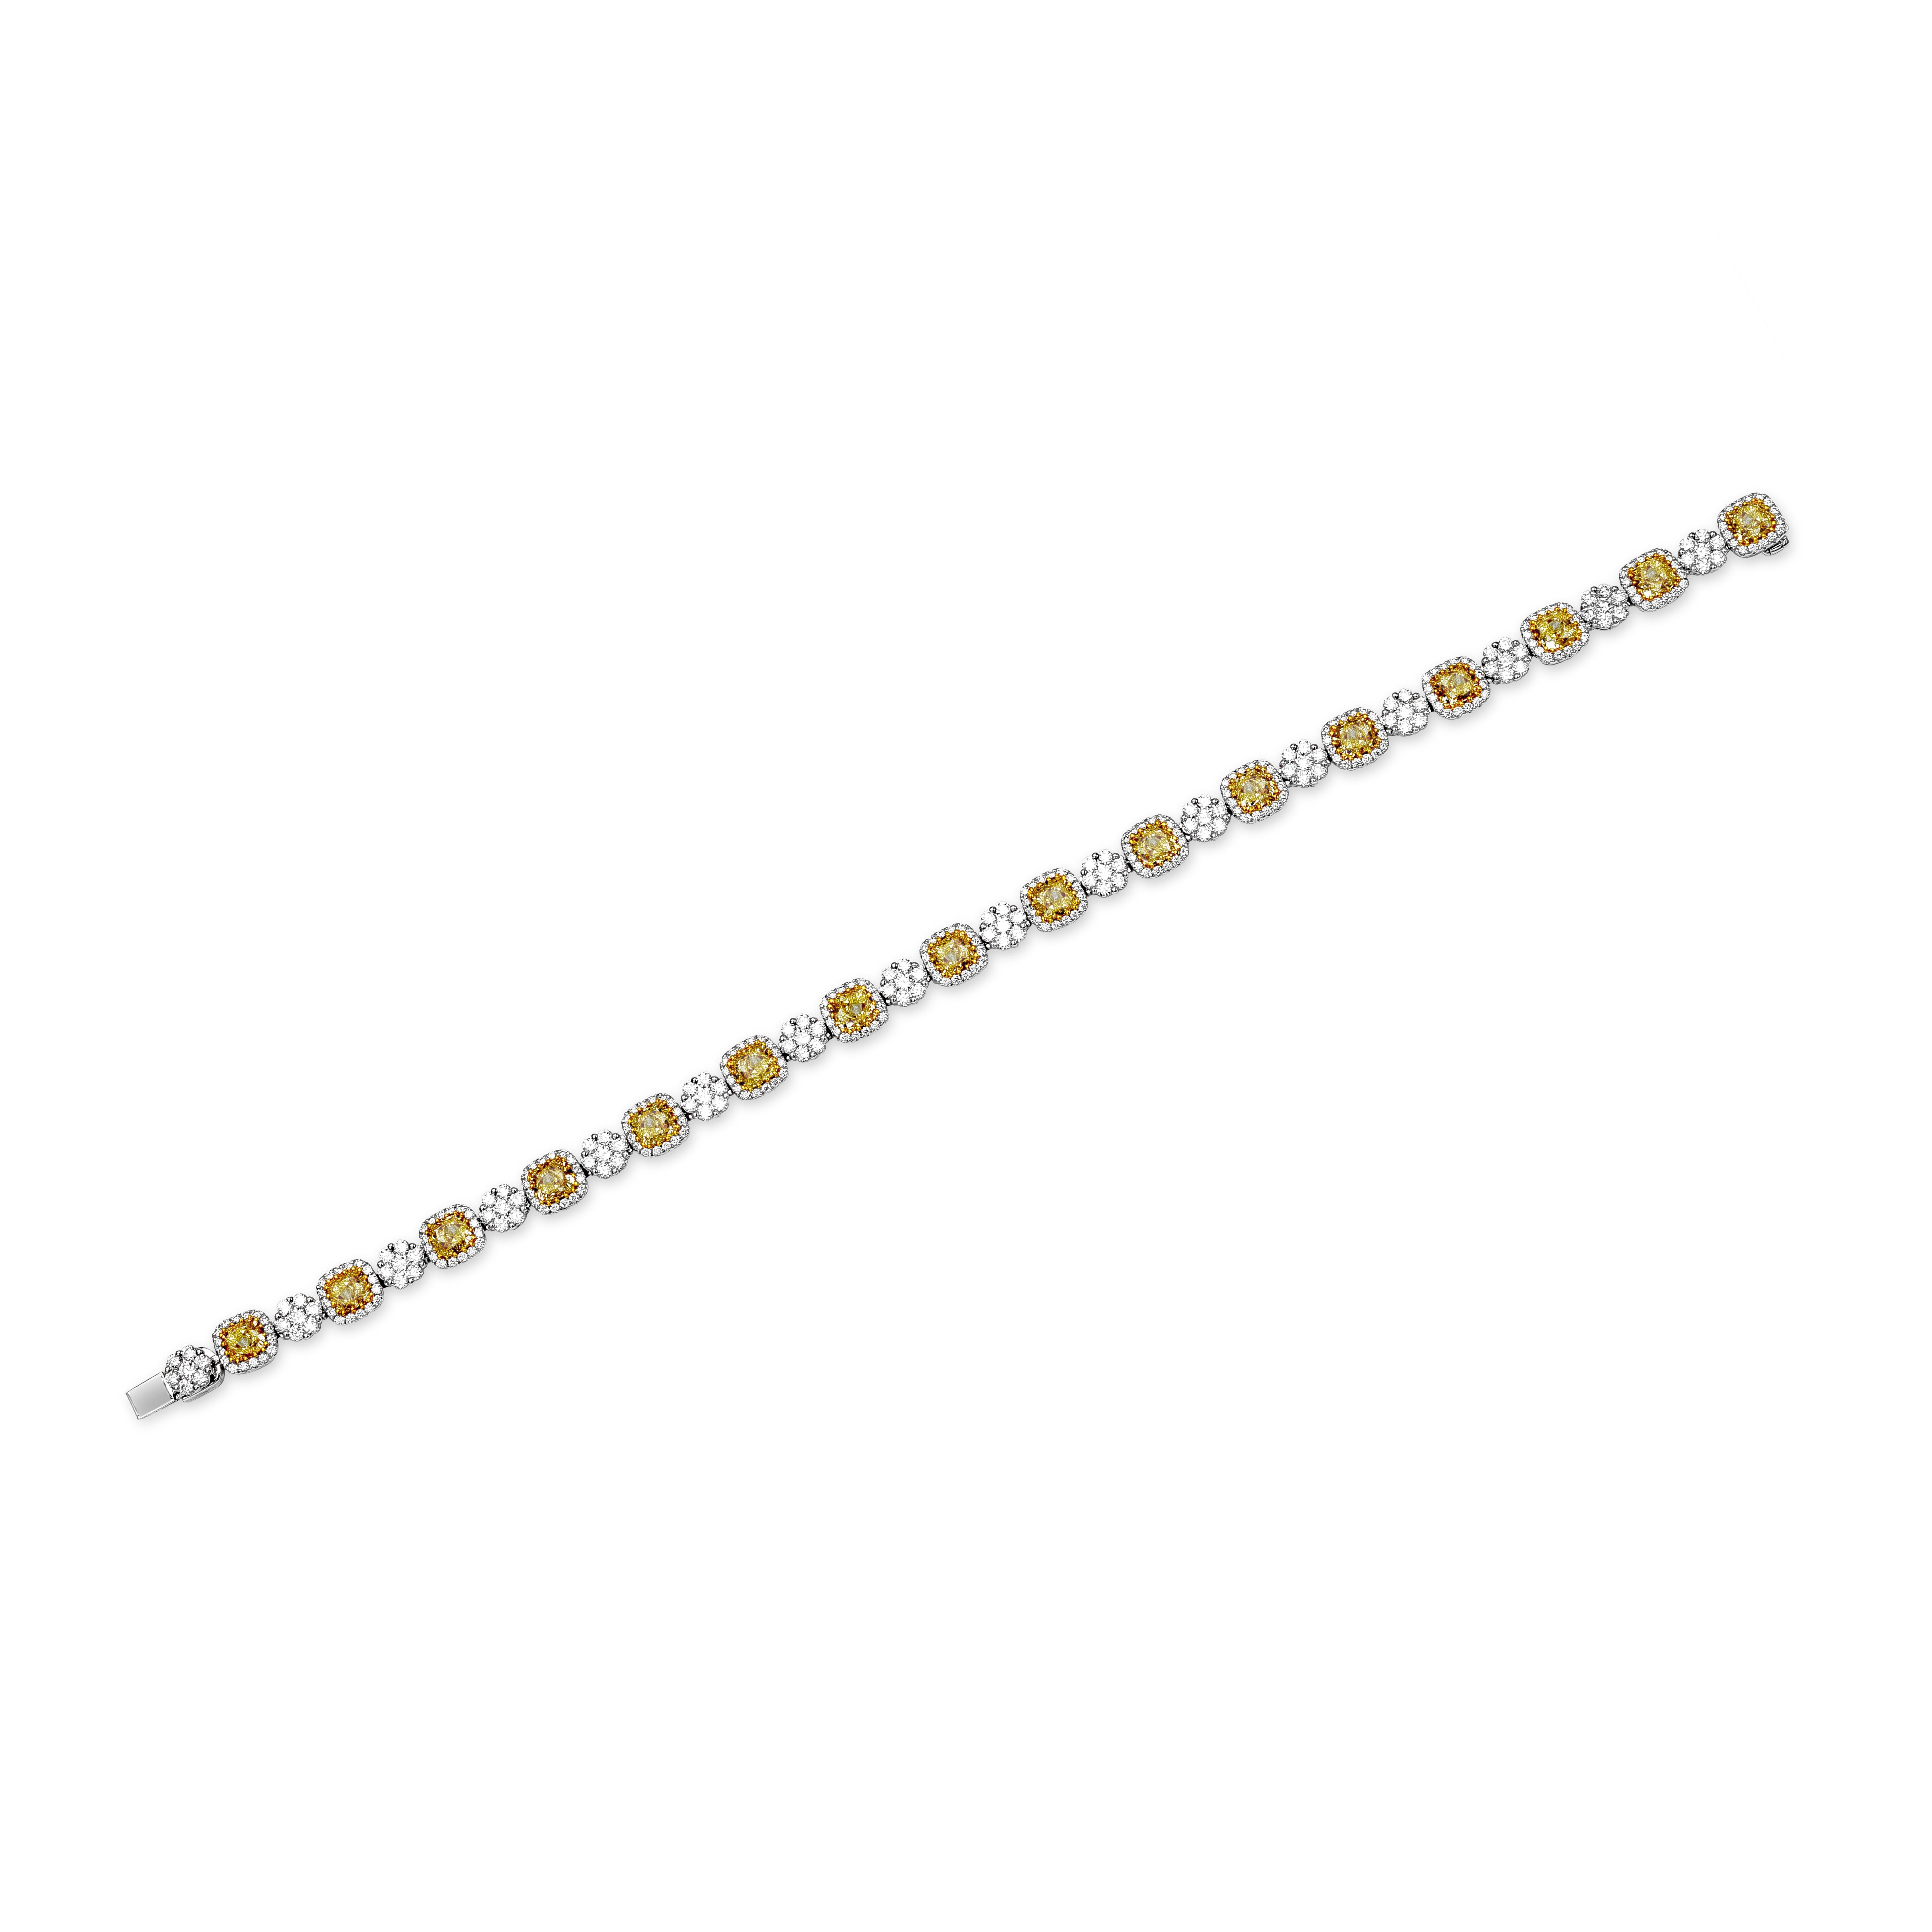 Bracelet set with 6.94 carats total cushion cut fancy yellow diamonds, VS in clarity, alternating with 3.10 carats total round brilliant diamonds, FG color and VS in clarity. Each cushion cut yellow diamonds are accented by a single row of round